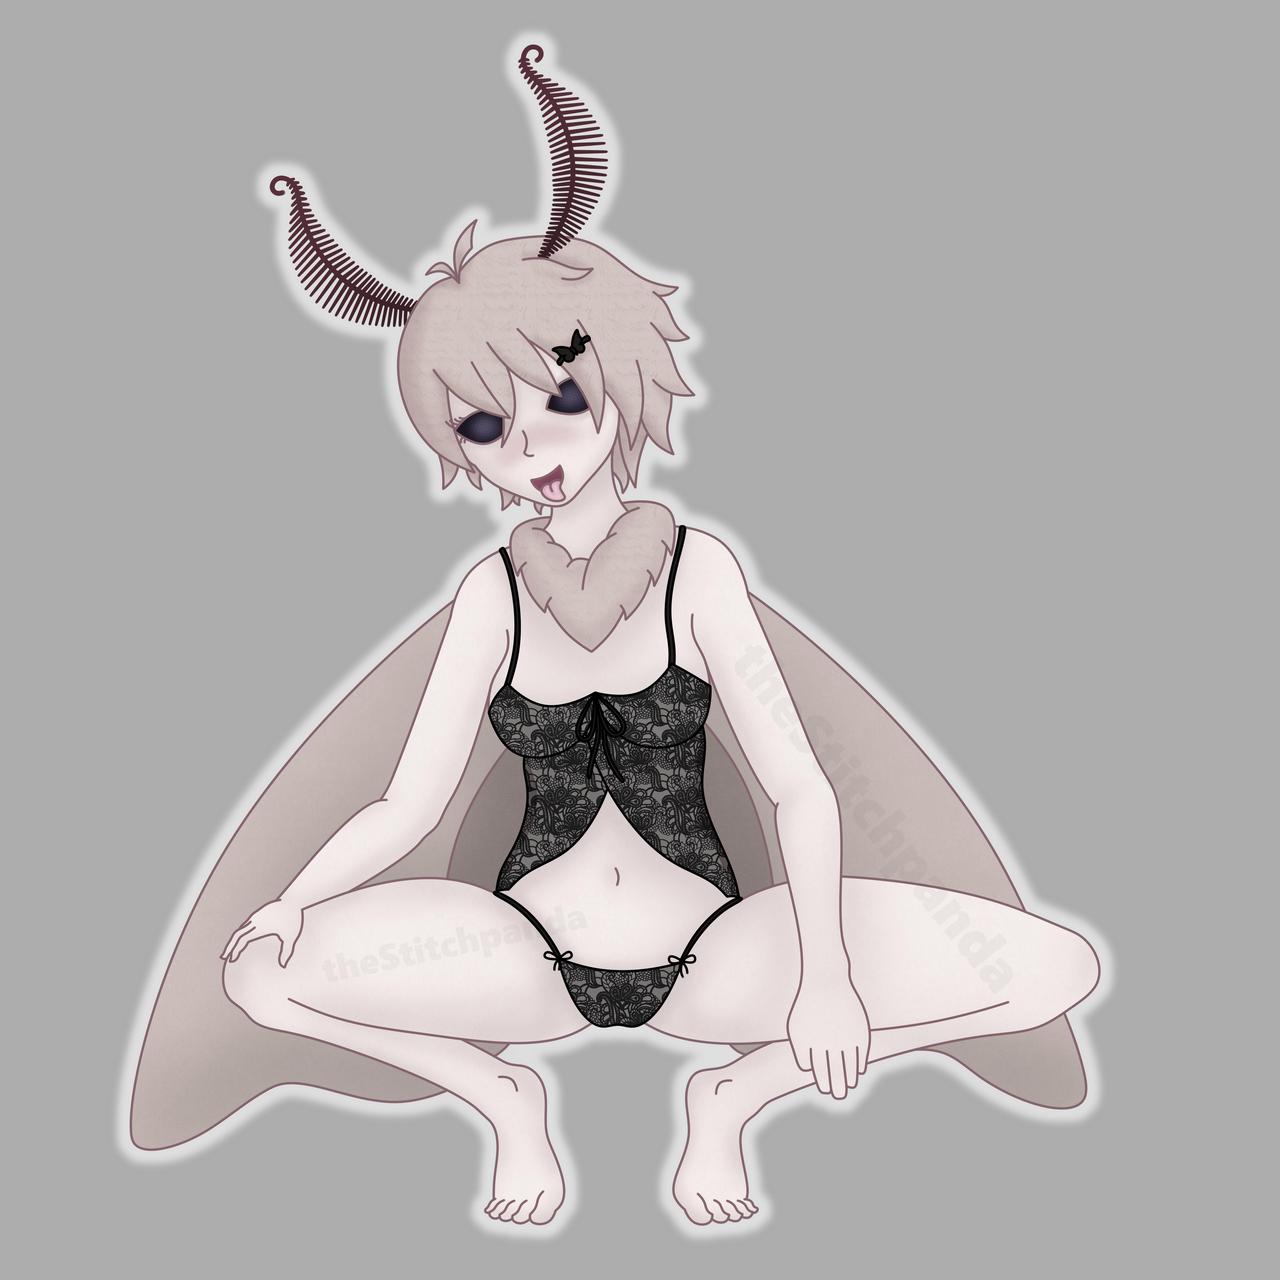 I Drew A Mothgirl A Lady Of The Night If You Wil